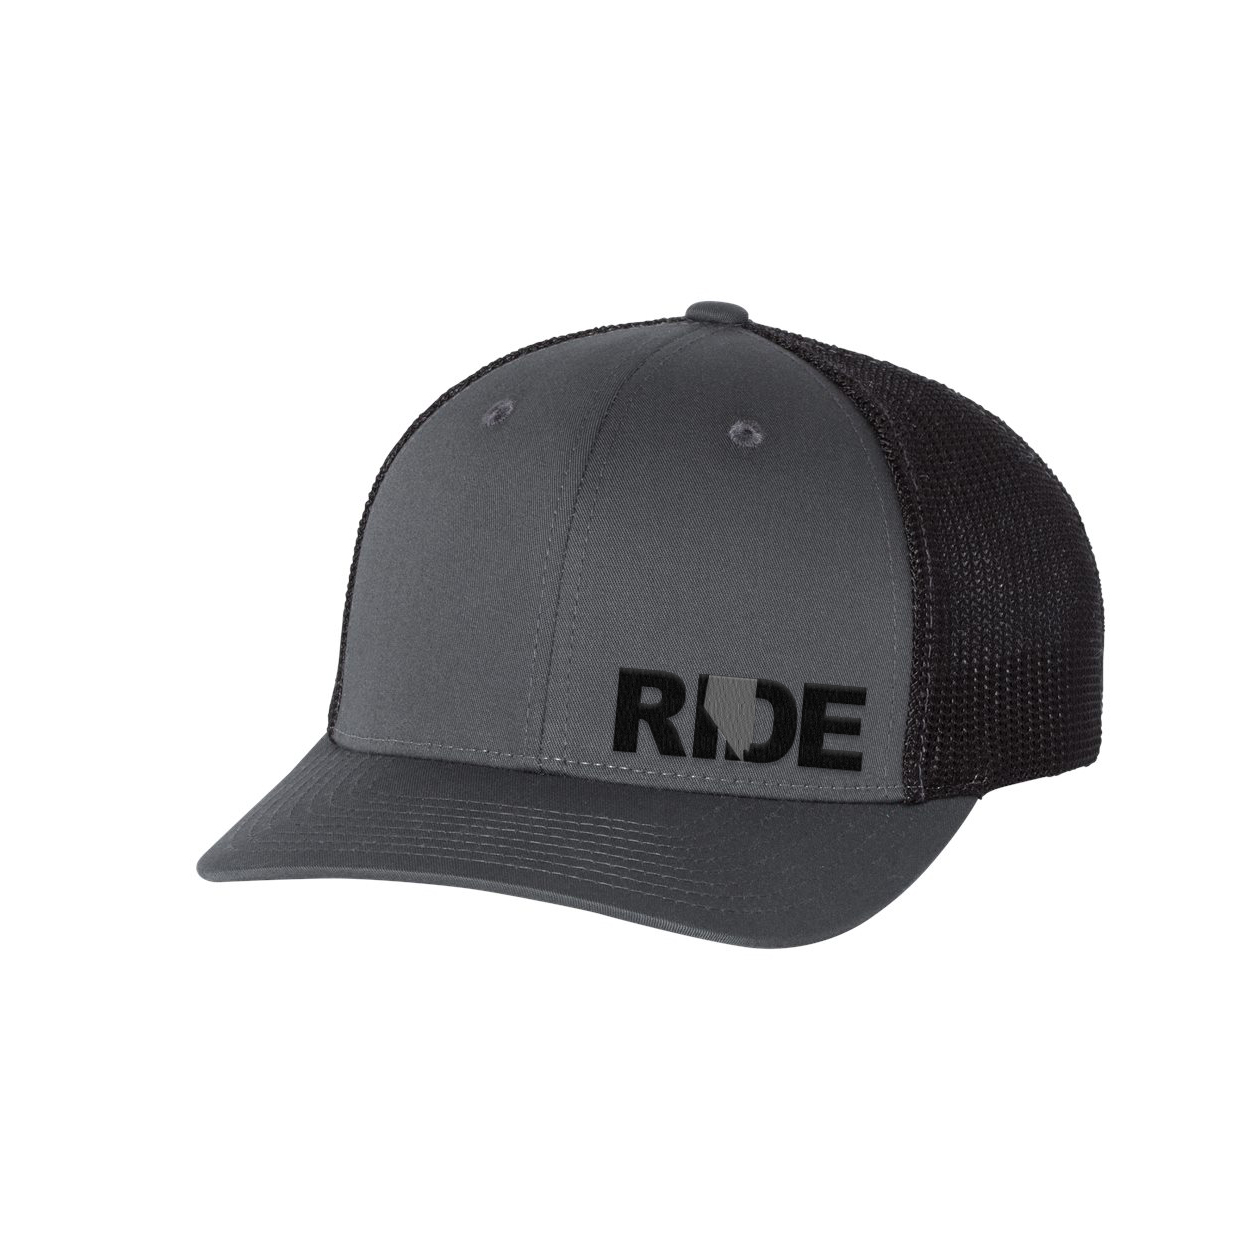 Ride Nevada Night Out Embroidered Snapback Trucker Hat Gray/Black